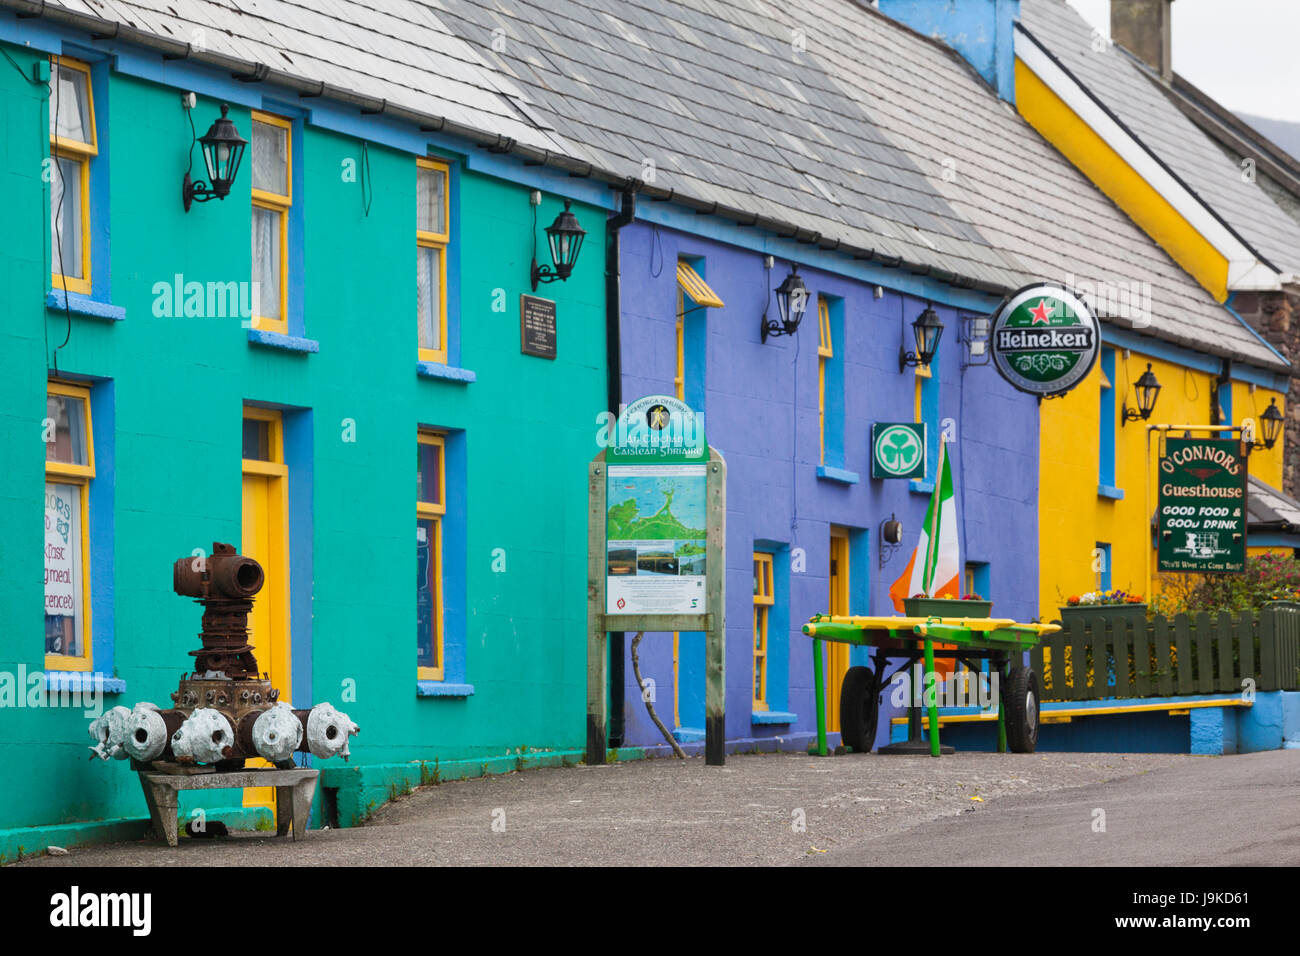 Ireland, County Kerry, Dingle Peninsula, Cloghane, colorful buildings Stock Photo